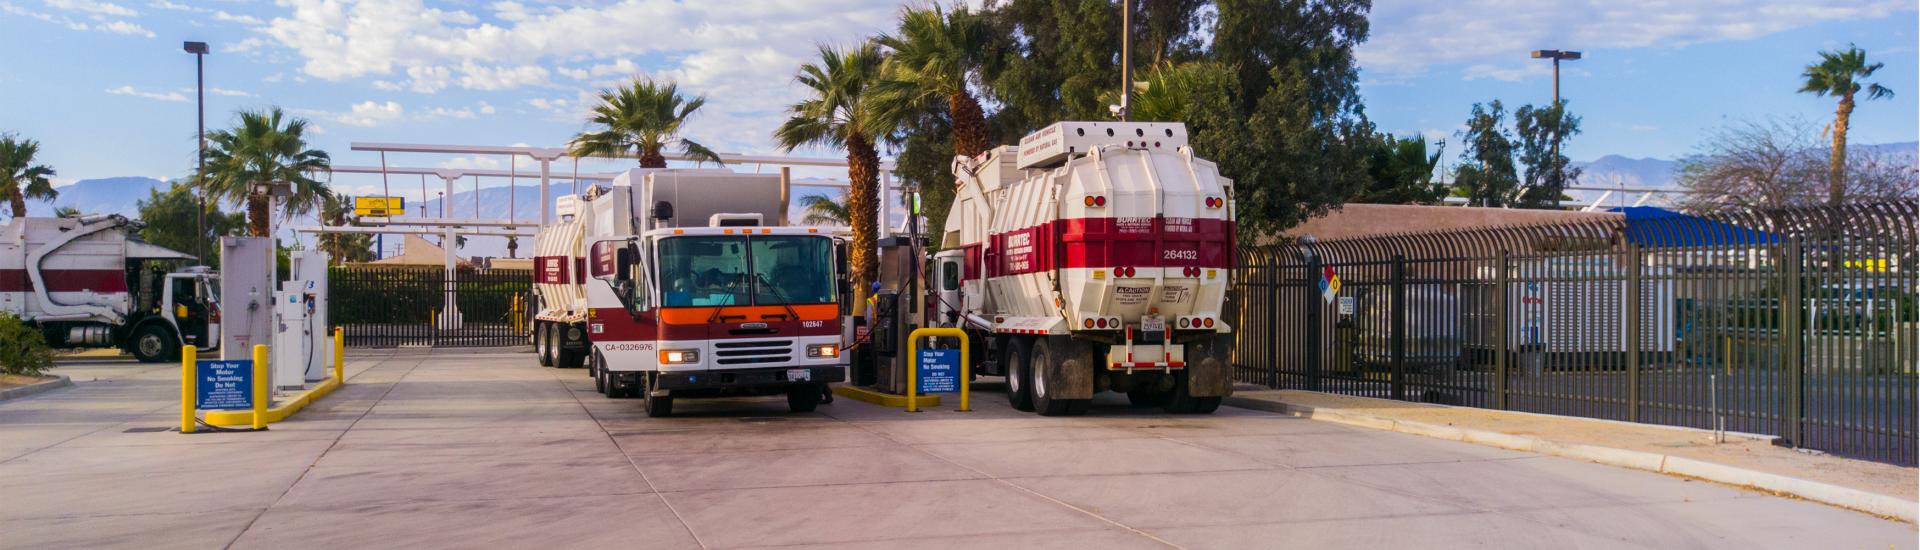 SunLine's Thousand Palms Fuel Station Serving Customers